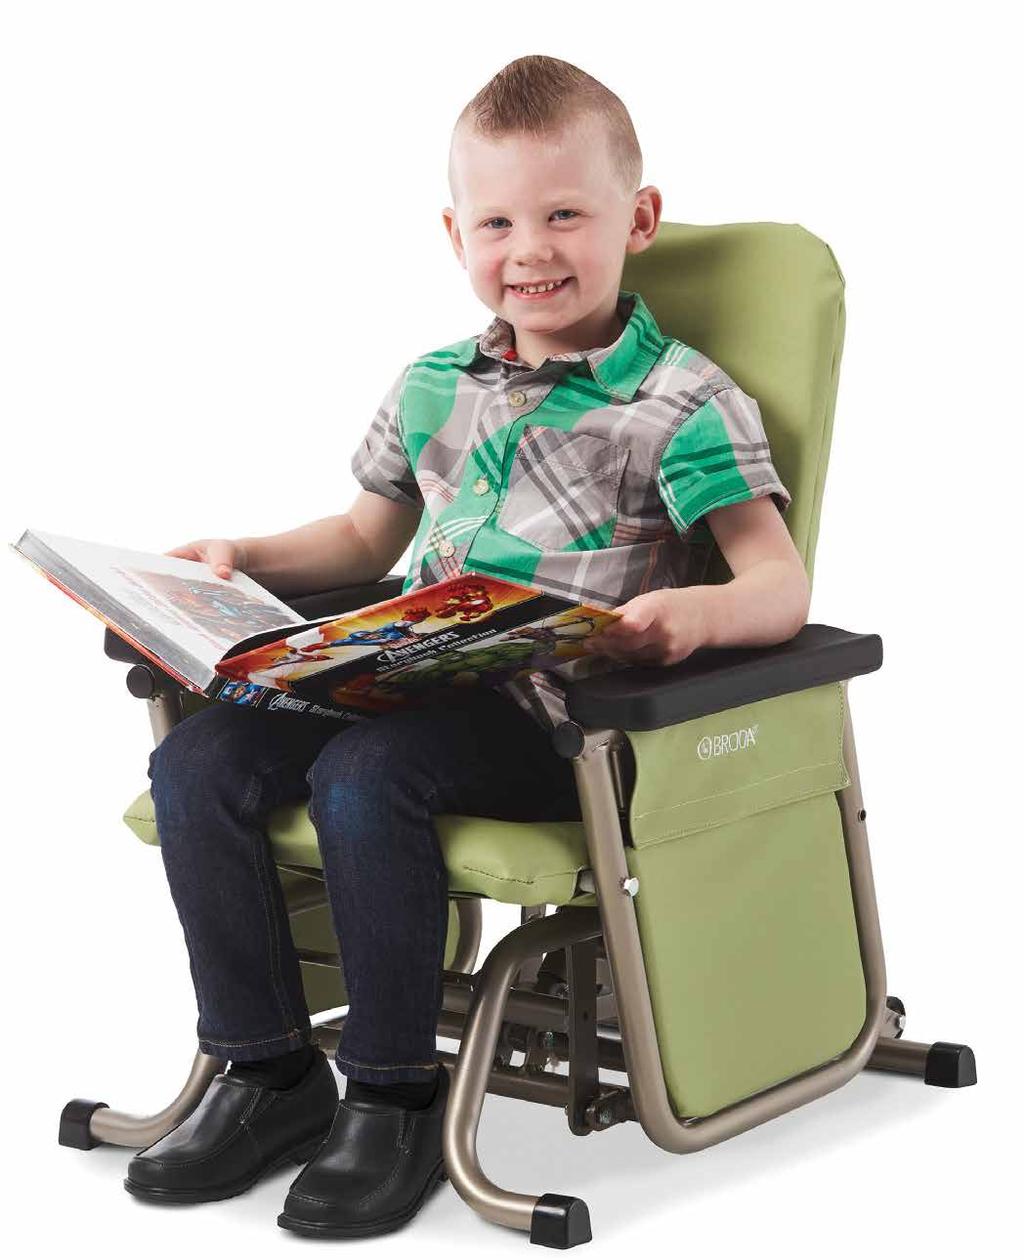 PARTICIPATION IN LEARNING Help children be a part of the activities and learning by providing the most comfortable seat in the house!